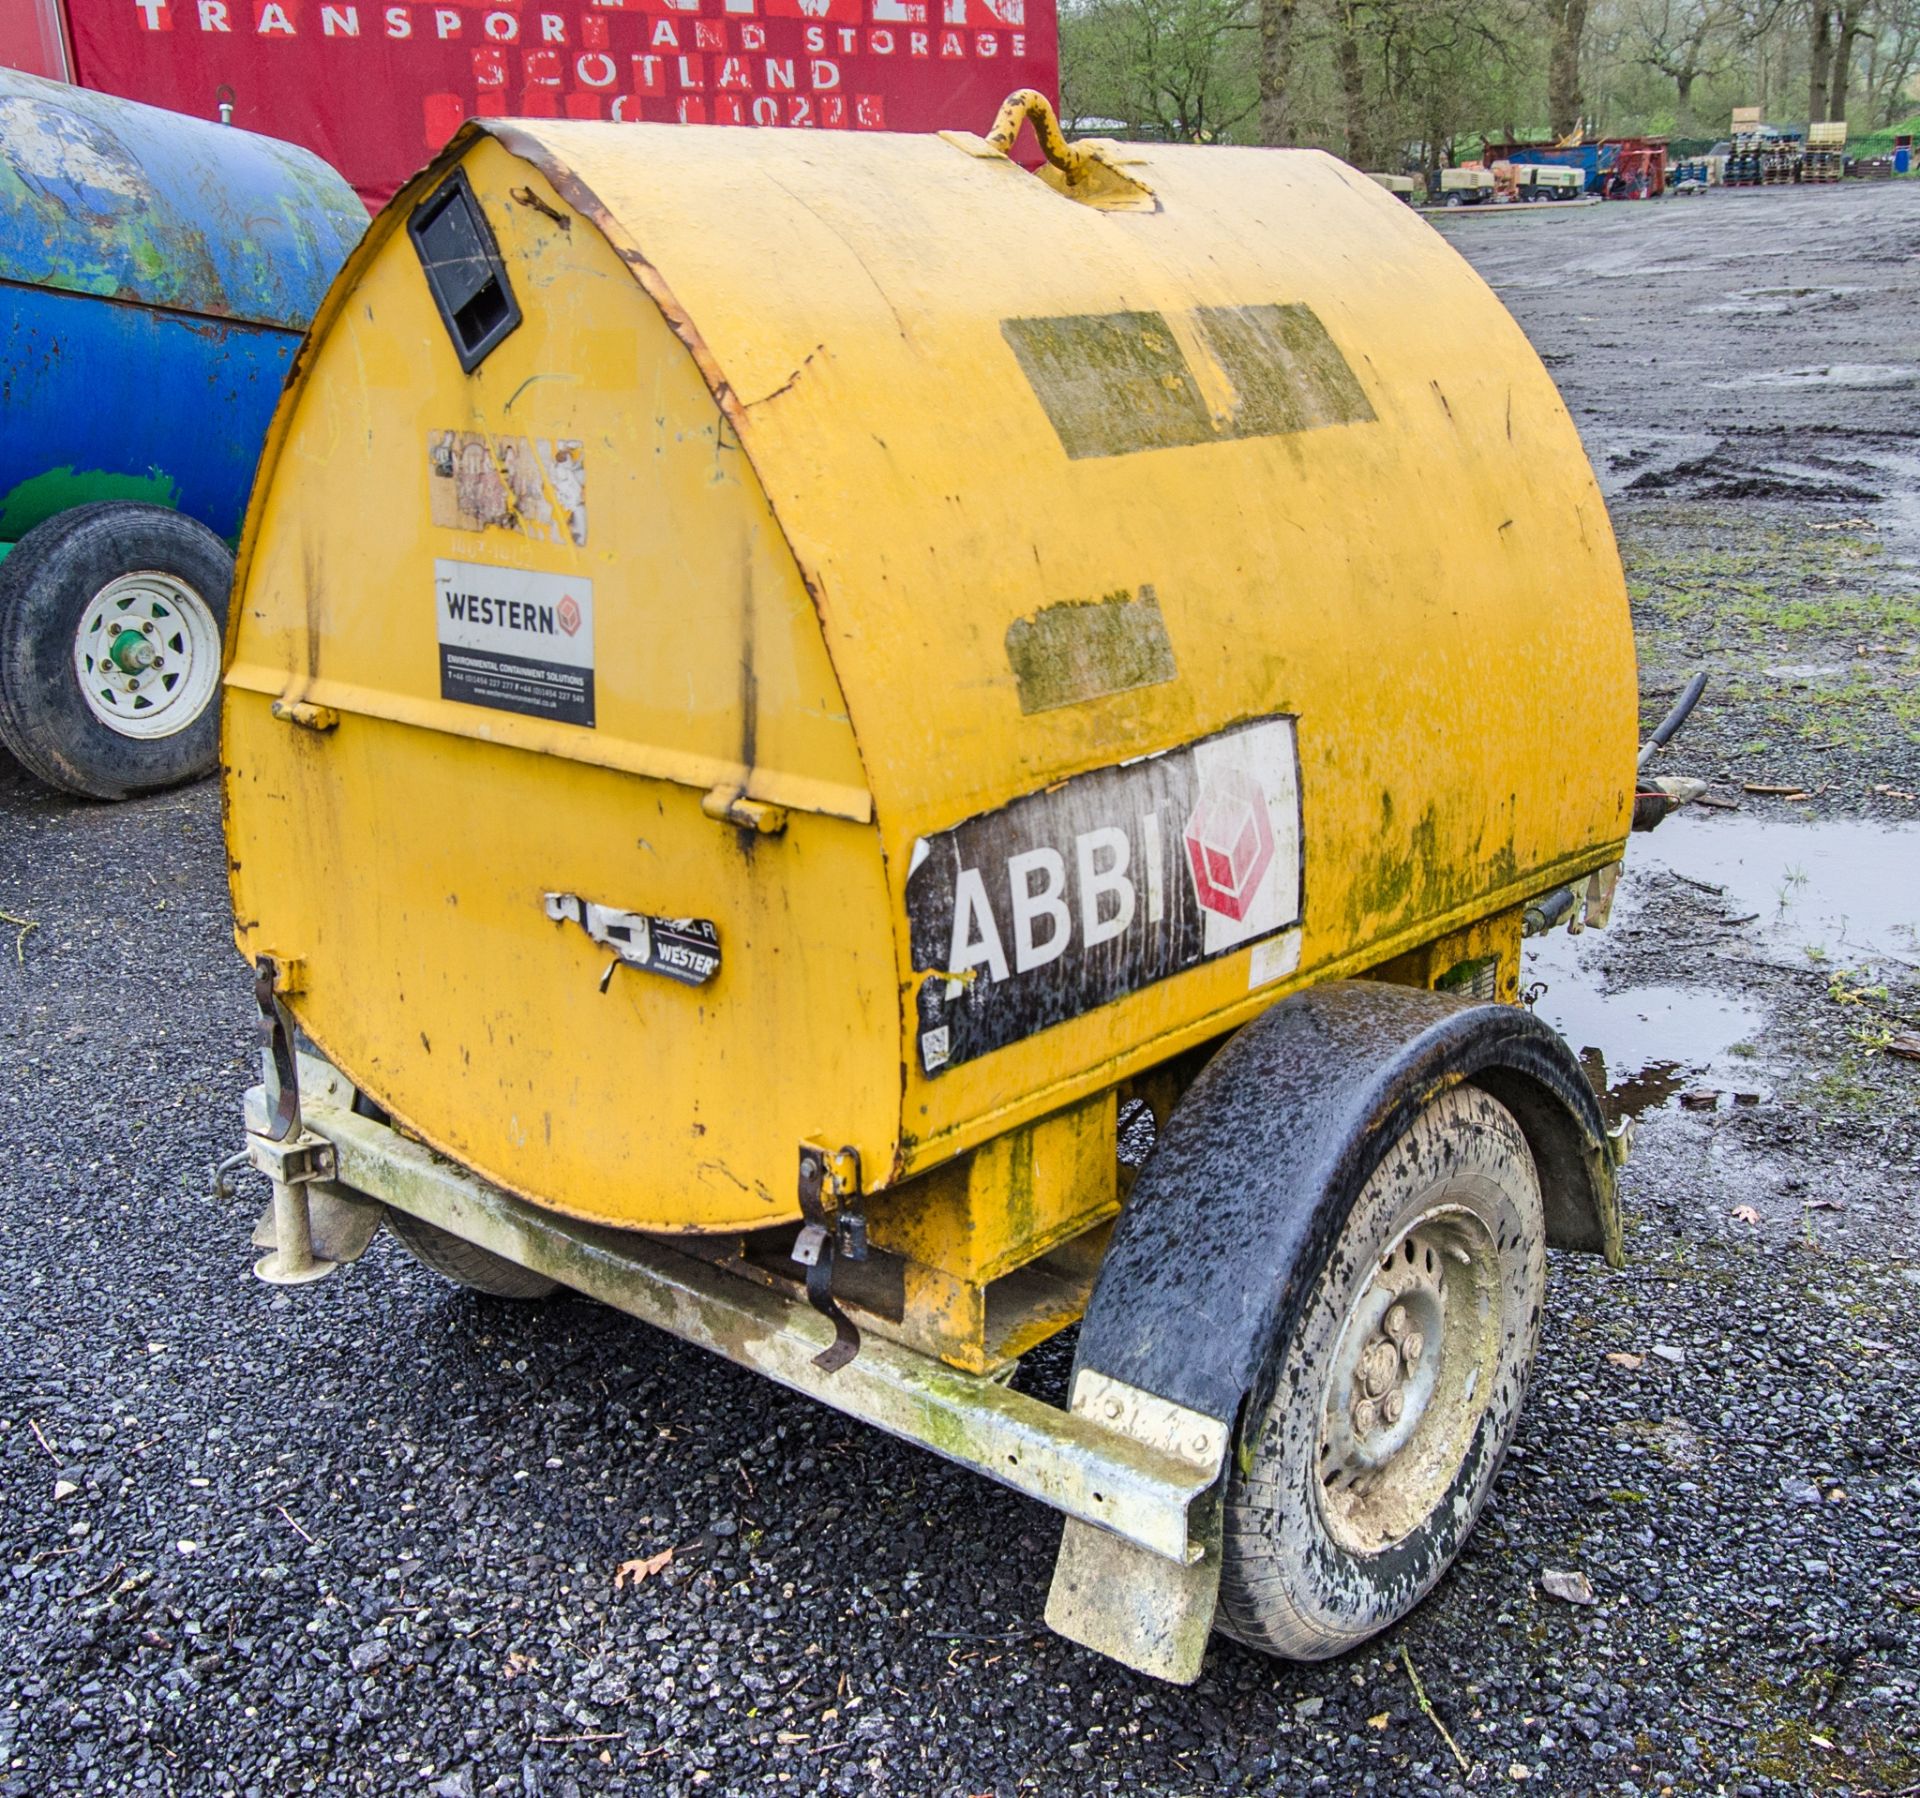 Western Abbi 950 litre fast tow bunded fuel bowser c/w manual pump, delivery hose & nozzle 14031402 - Image 3 of 7